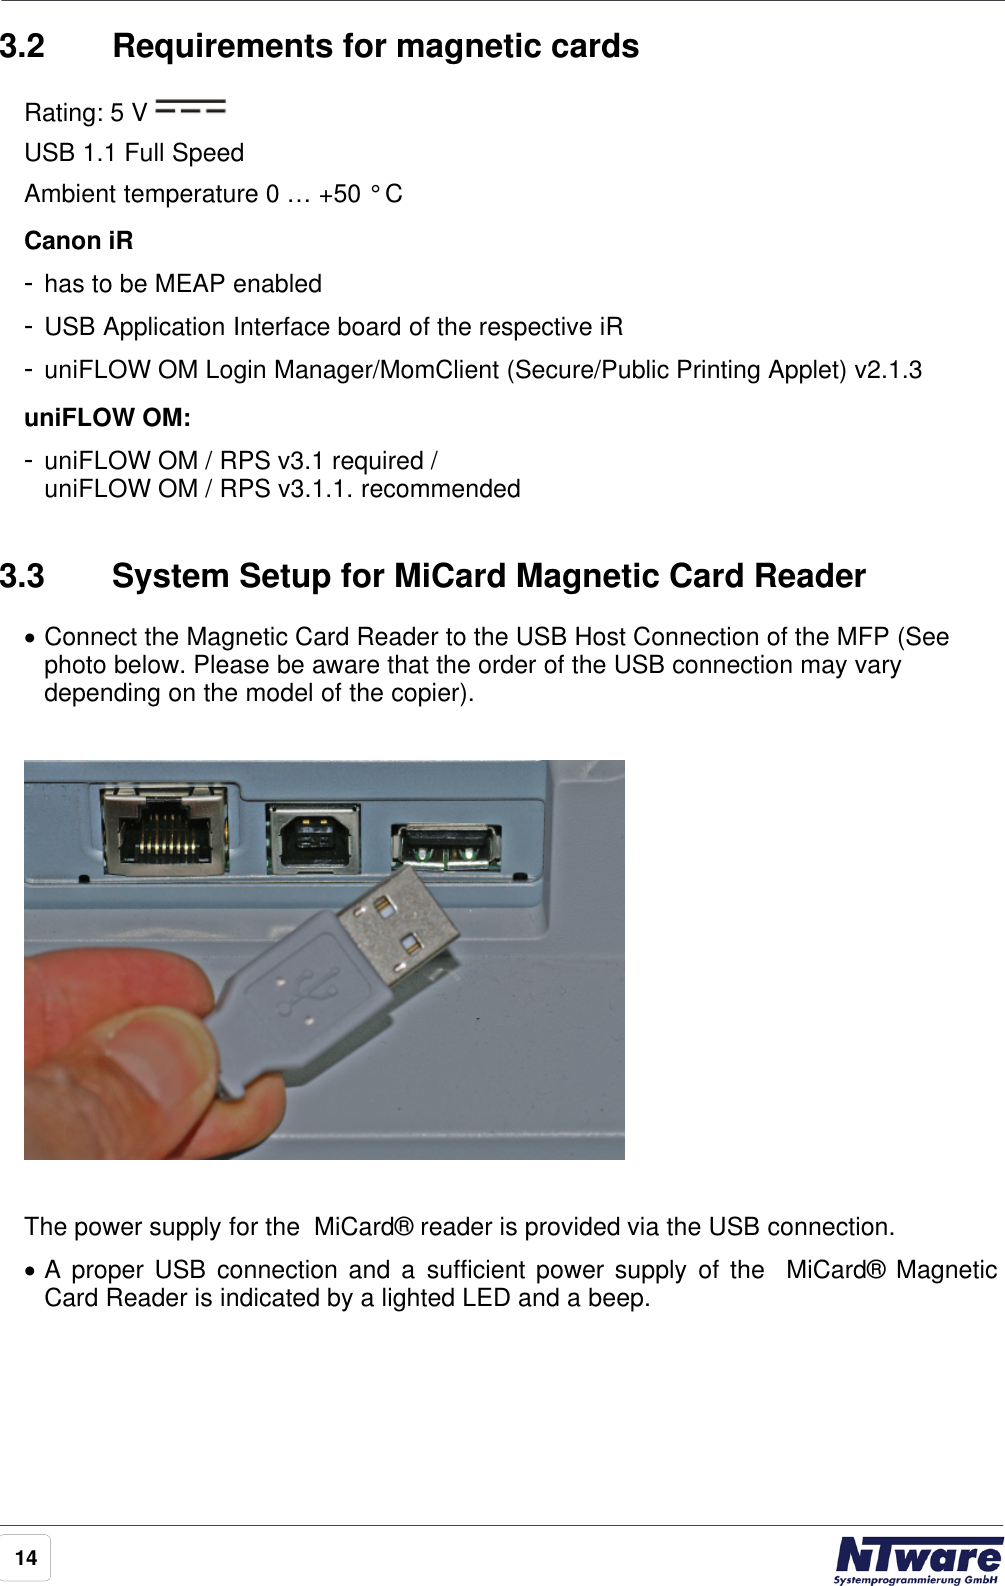 143.2 Requirements for magnetic cardsRating: 5 V USB 1.1 Full Speed Ambient temperature 0 … +50 ° CCanon iR-has to be MEAP enabled-USB Application Interface board of the respective iR-uniFLOW OM Login Manager/MomClient (Secure/Public Printing Applet) v2.1.3uniFLOW OM:-uniFLOW OM / RPS v3.1 required /uniFLOW OM / RPS v3.1.1. recommended3.3 System Setup for MiCard Magnetic Card Reader·Connect the Magnetic Card Reader to the USB Host Connection of the MFP (Seephoto below. Please be aware that the order of the USB connection may varydepending on the model of the copier).The power supply for the  MiCard® reader is provided via the USB connection.·A proper USB connection and  a  sufficient power  supply of  the    MiCard®  MagneticCard Reader is indicated by a lighted LED and a beep.